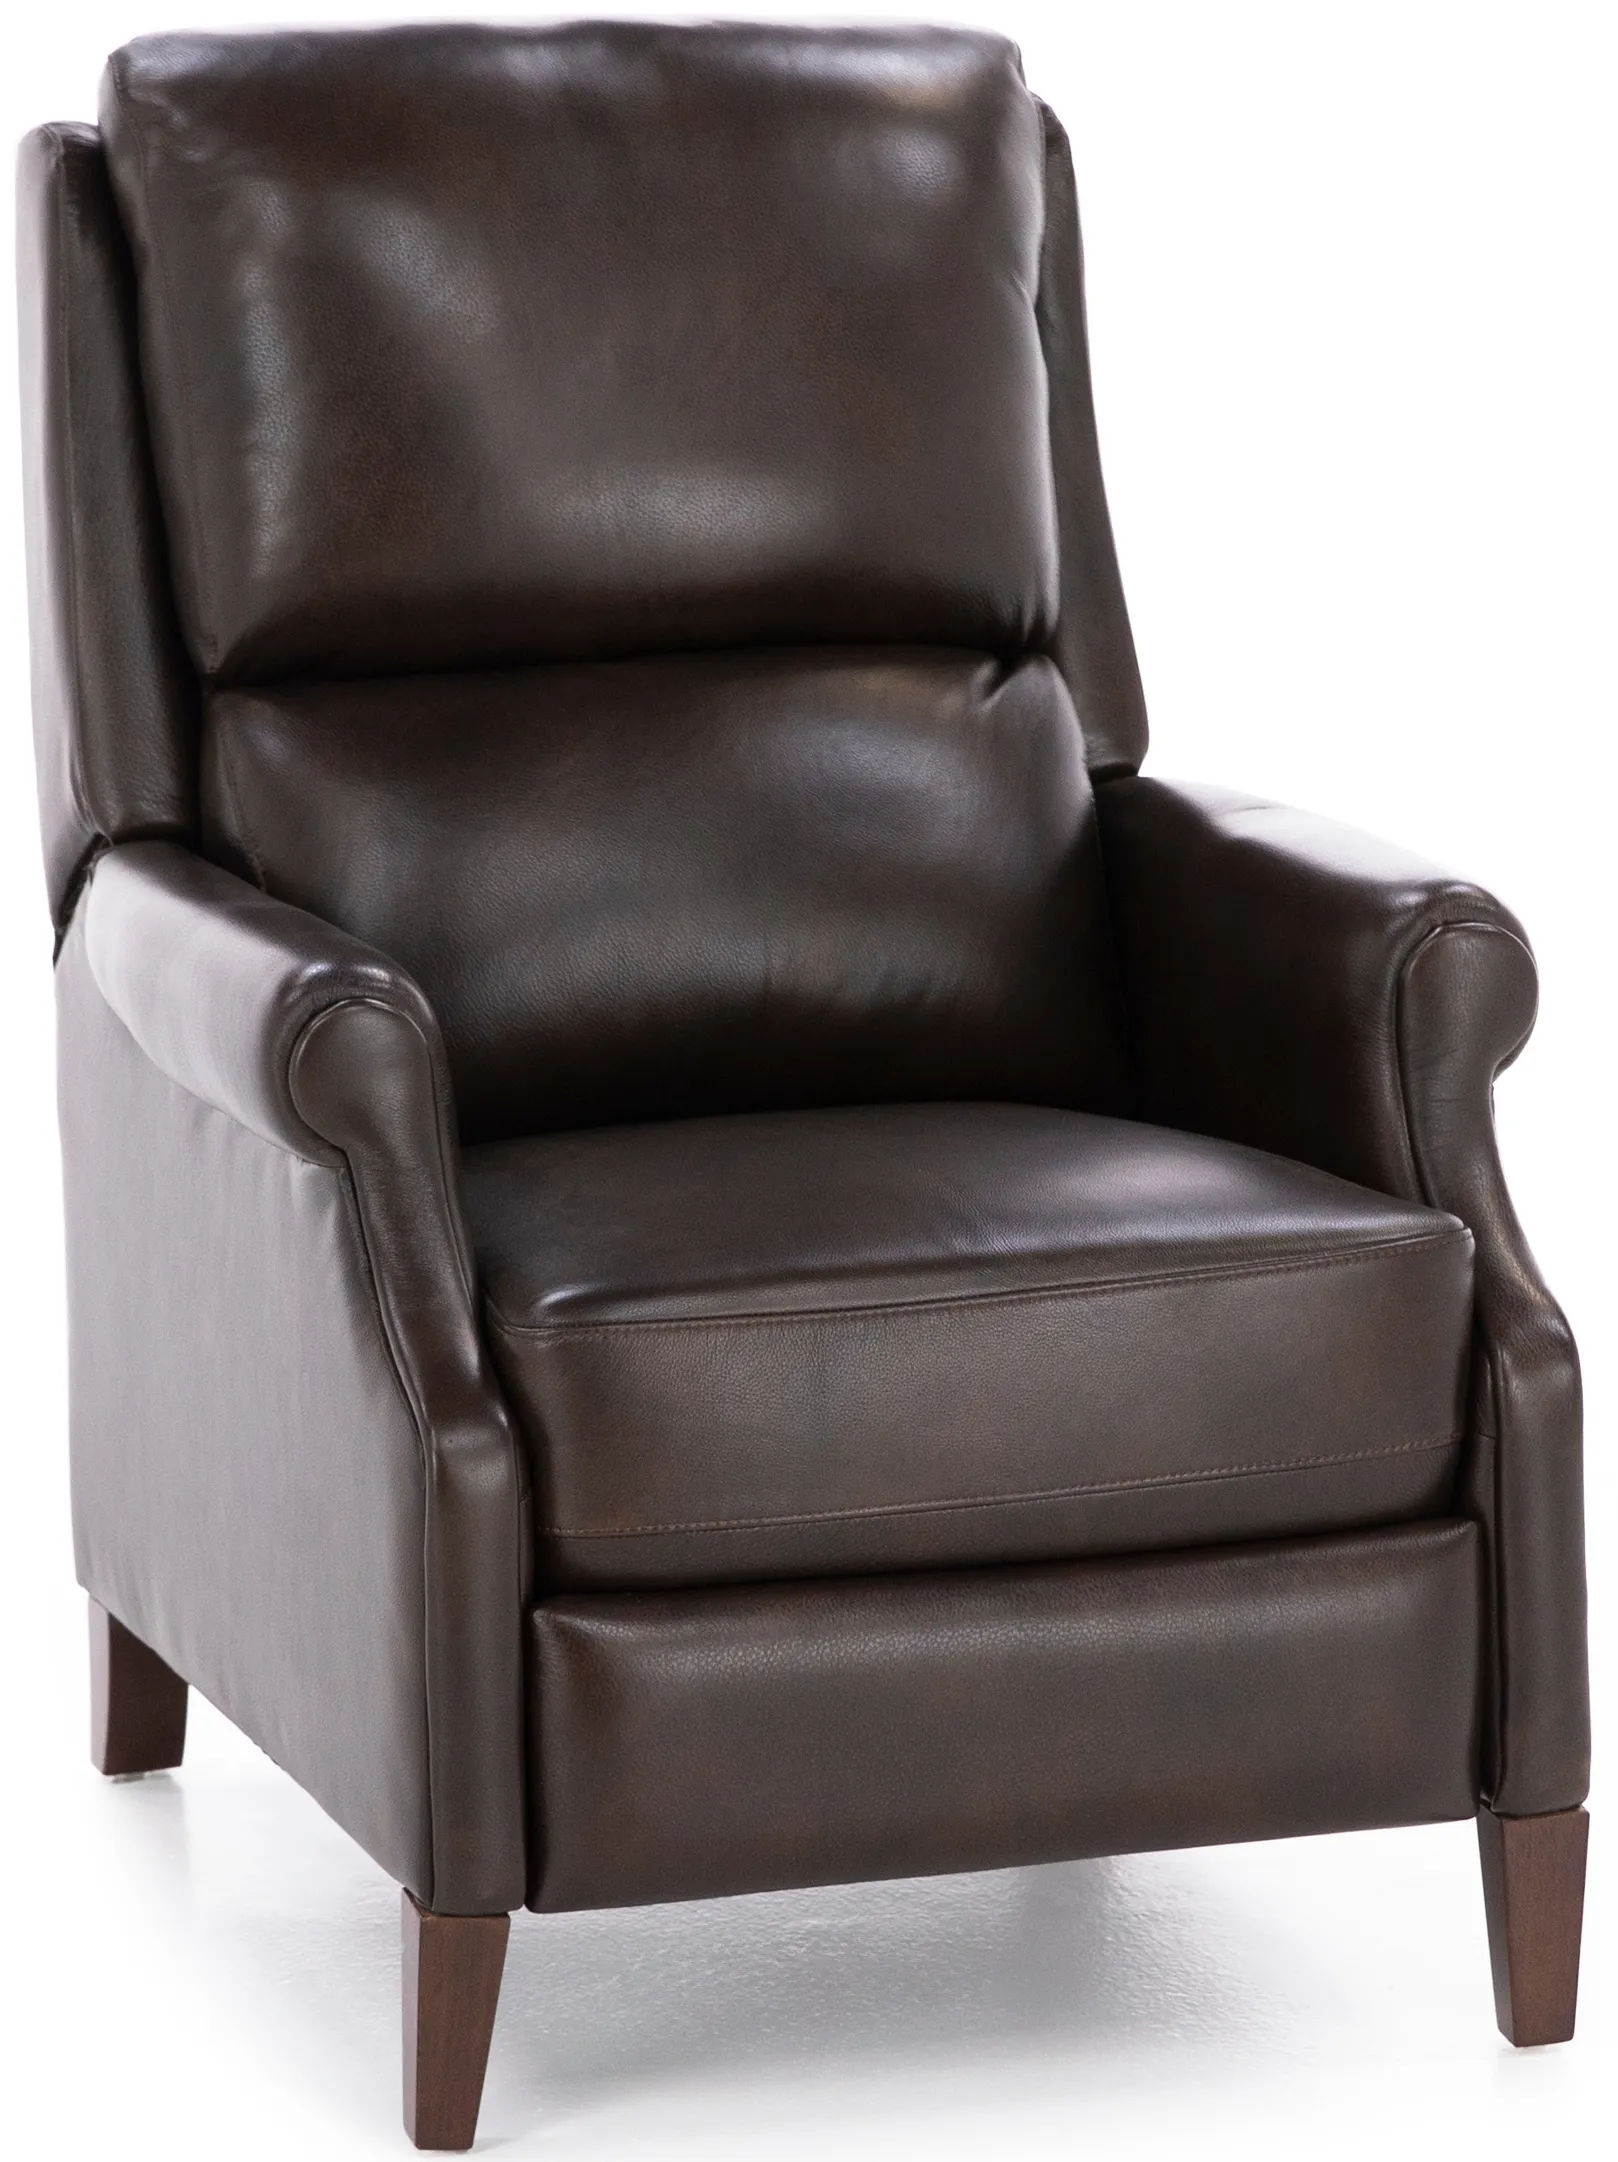 Claire Leather Push Back Recliner